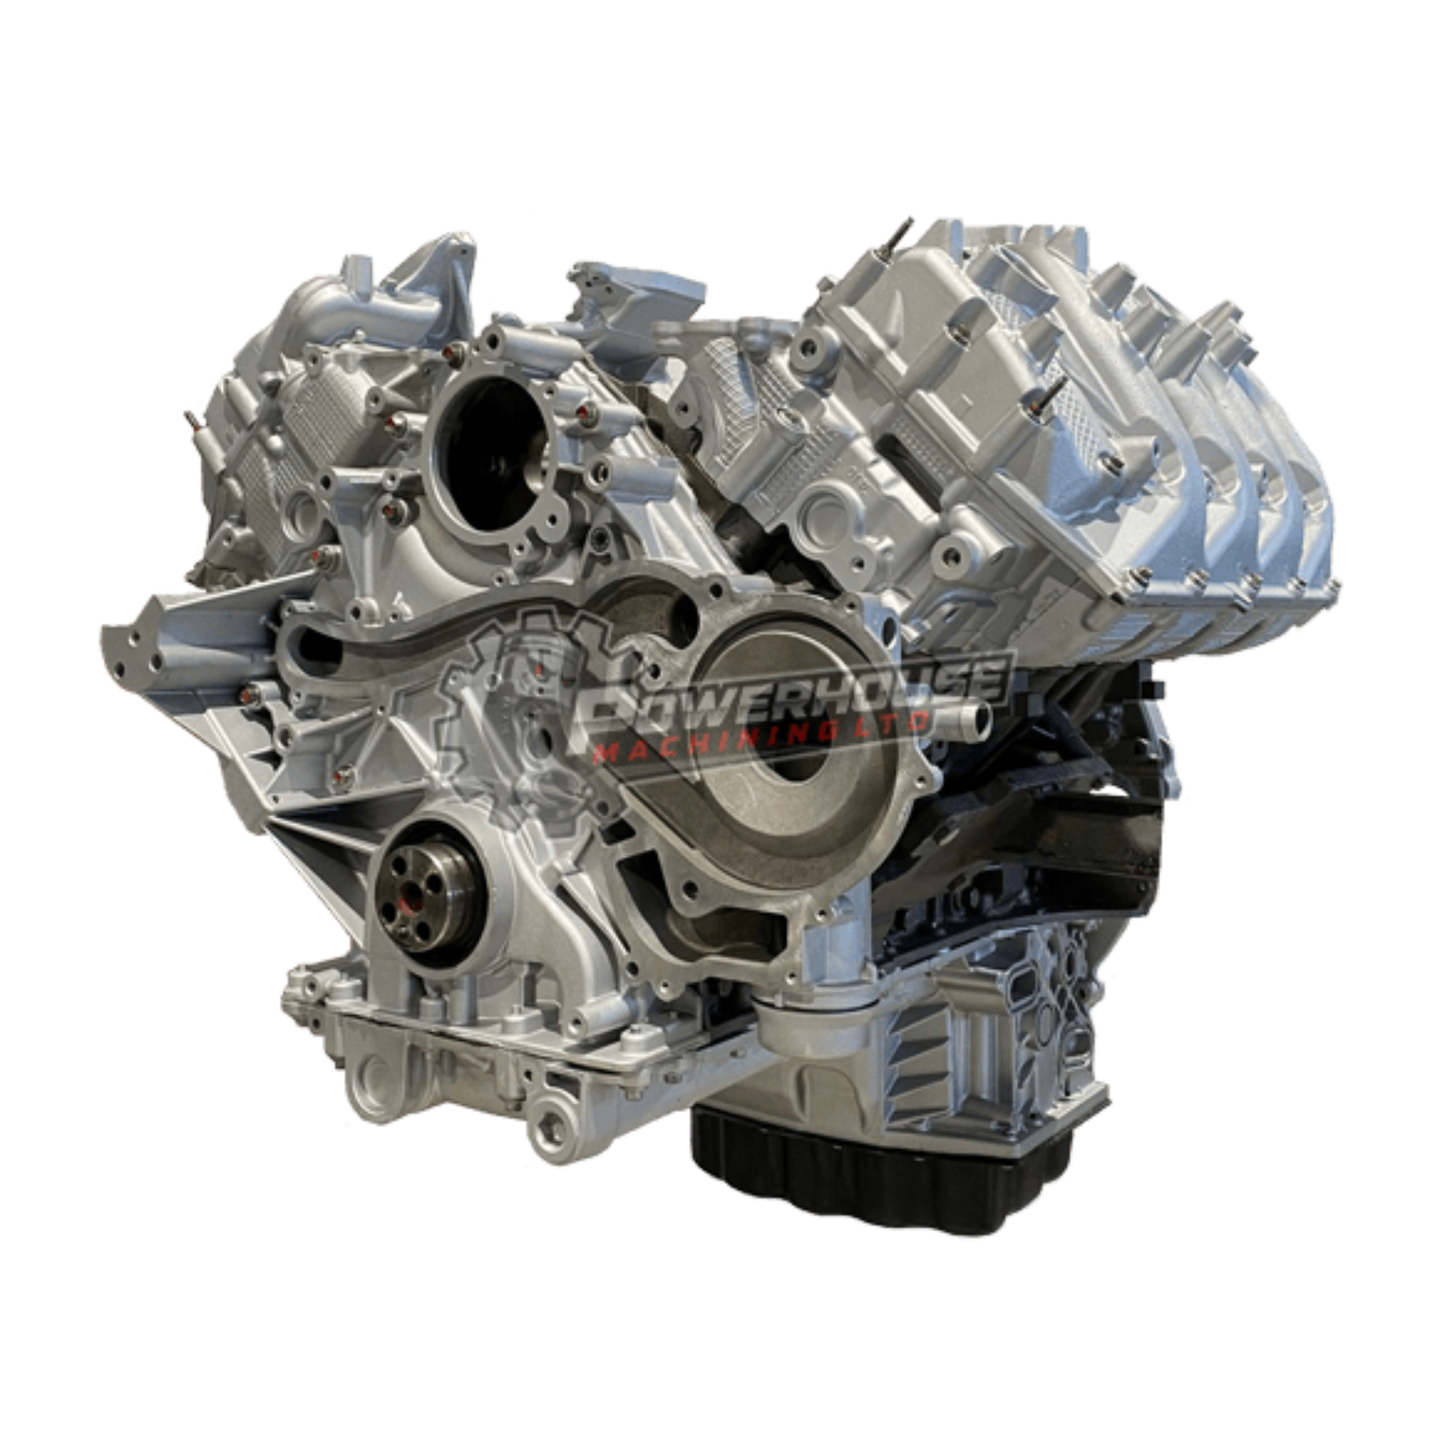 2011-2014 Ford Powerstroke 6.7L BTO -<span style="background-color:rgb(246,247,248);color:rgb(28,30,33);"> PowerHouse Machining </span>